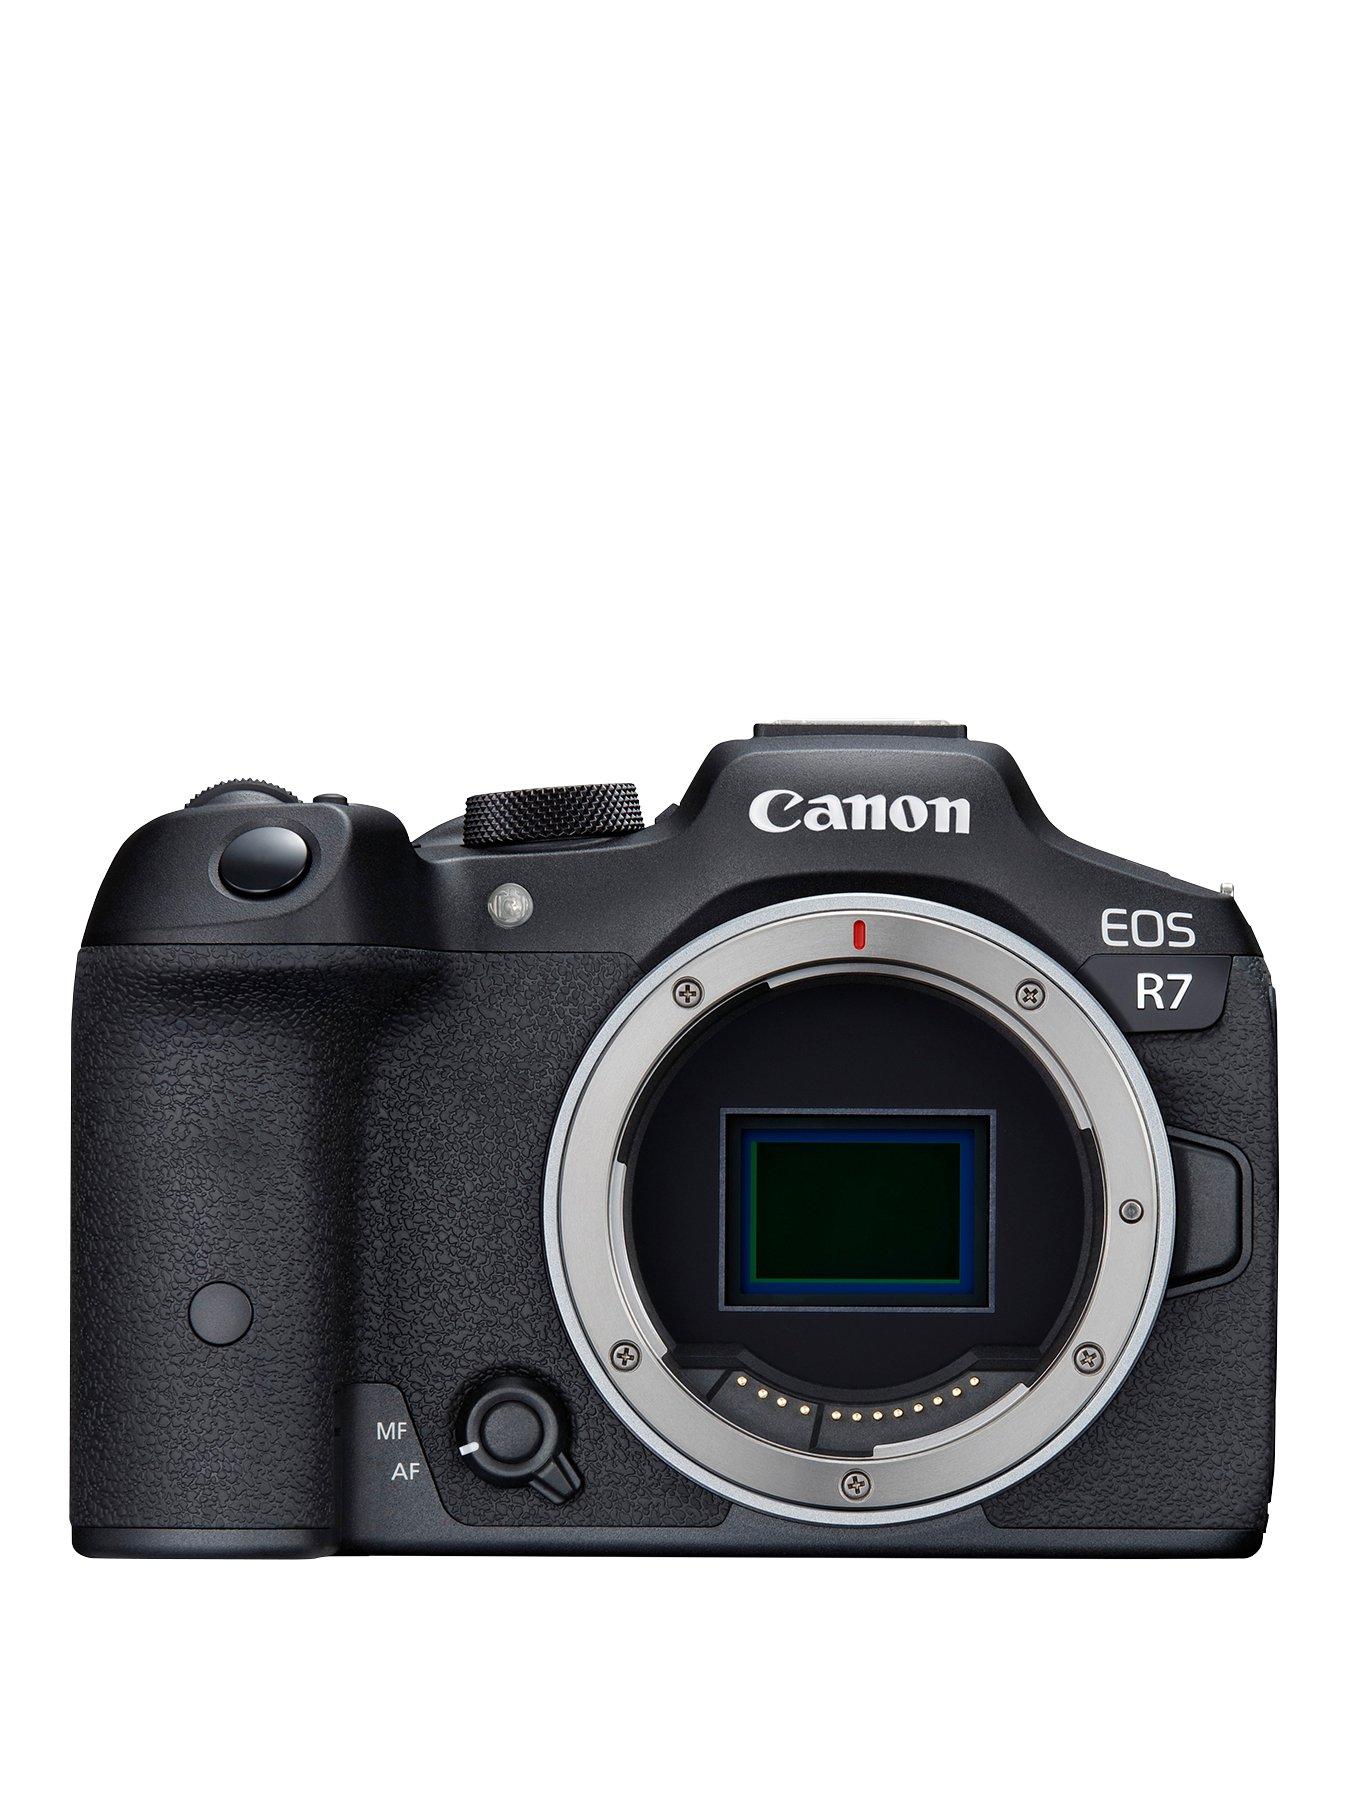 Canon EOS 2000D Digital SLR Camera with 18-55mm III DC Lens, 1080p Full HD,  24.1MP, Wi-Fi, NFC, Optical Viewfinder, 3 LCD Screen, Black